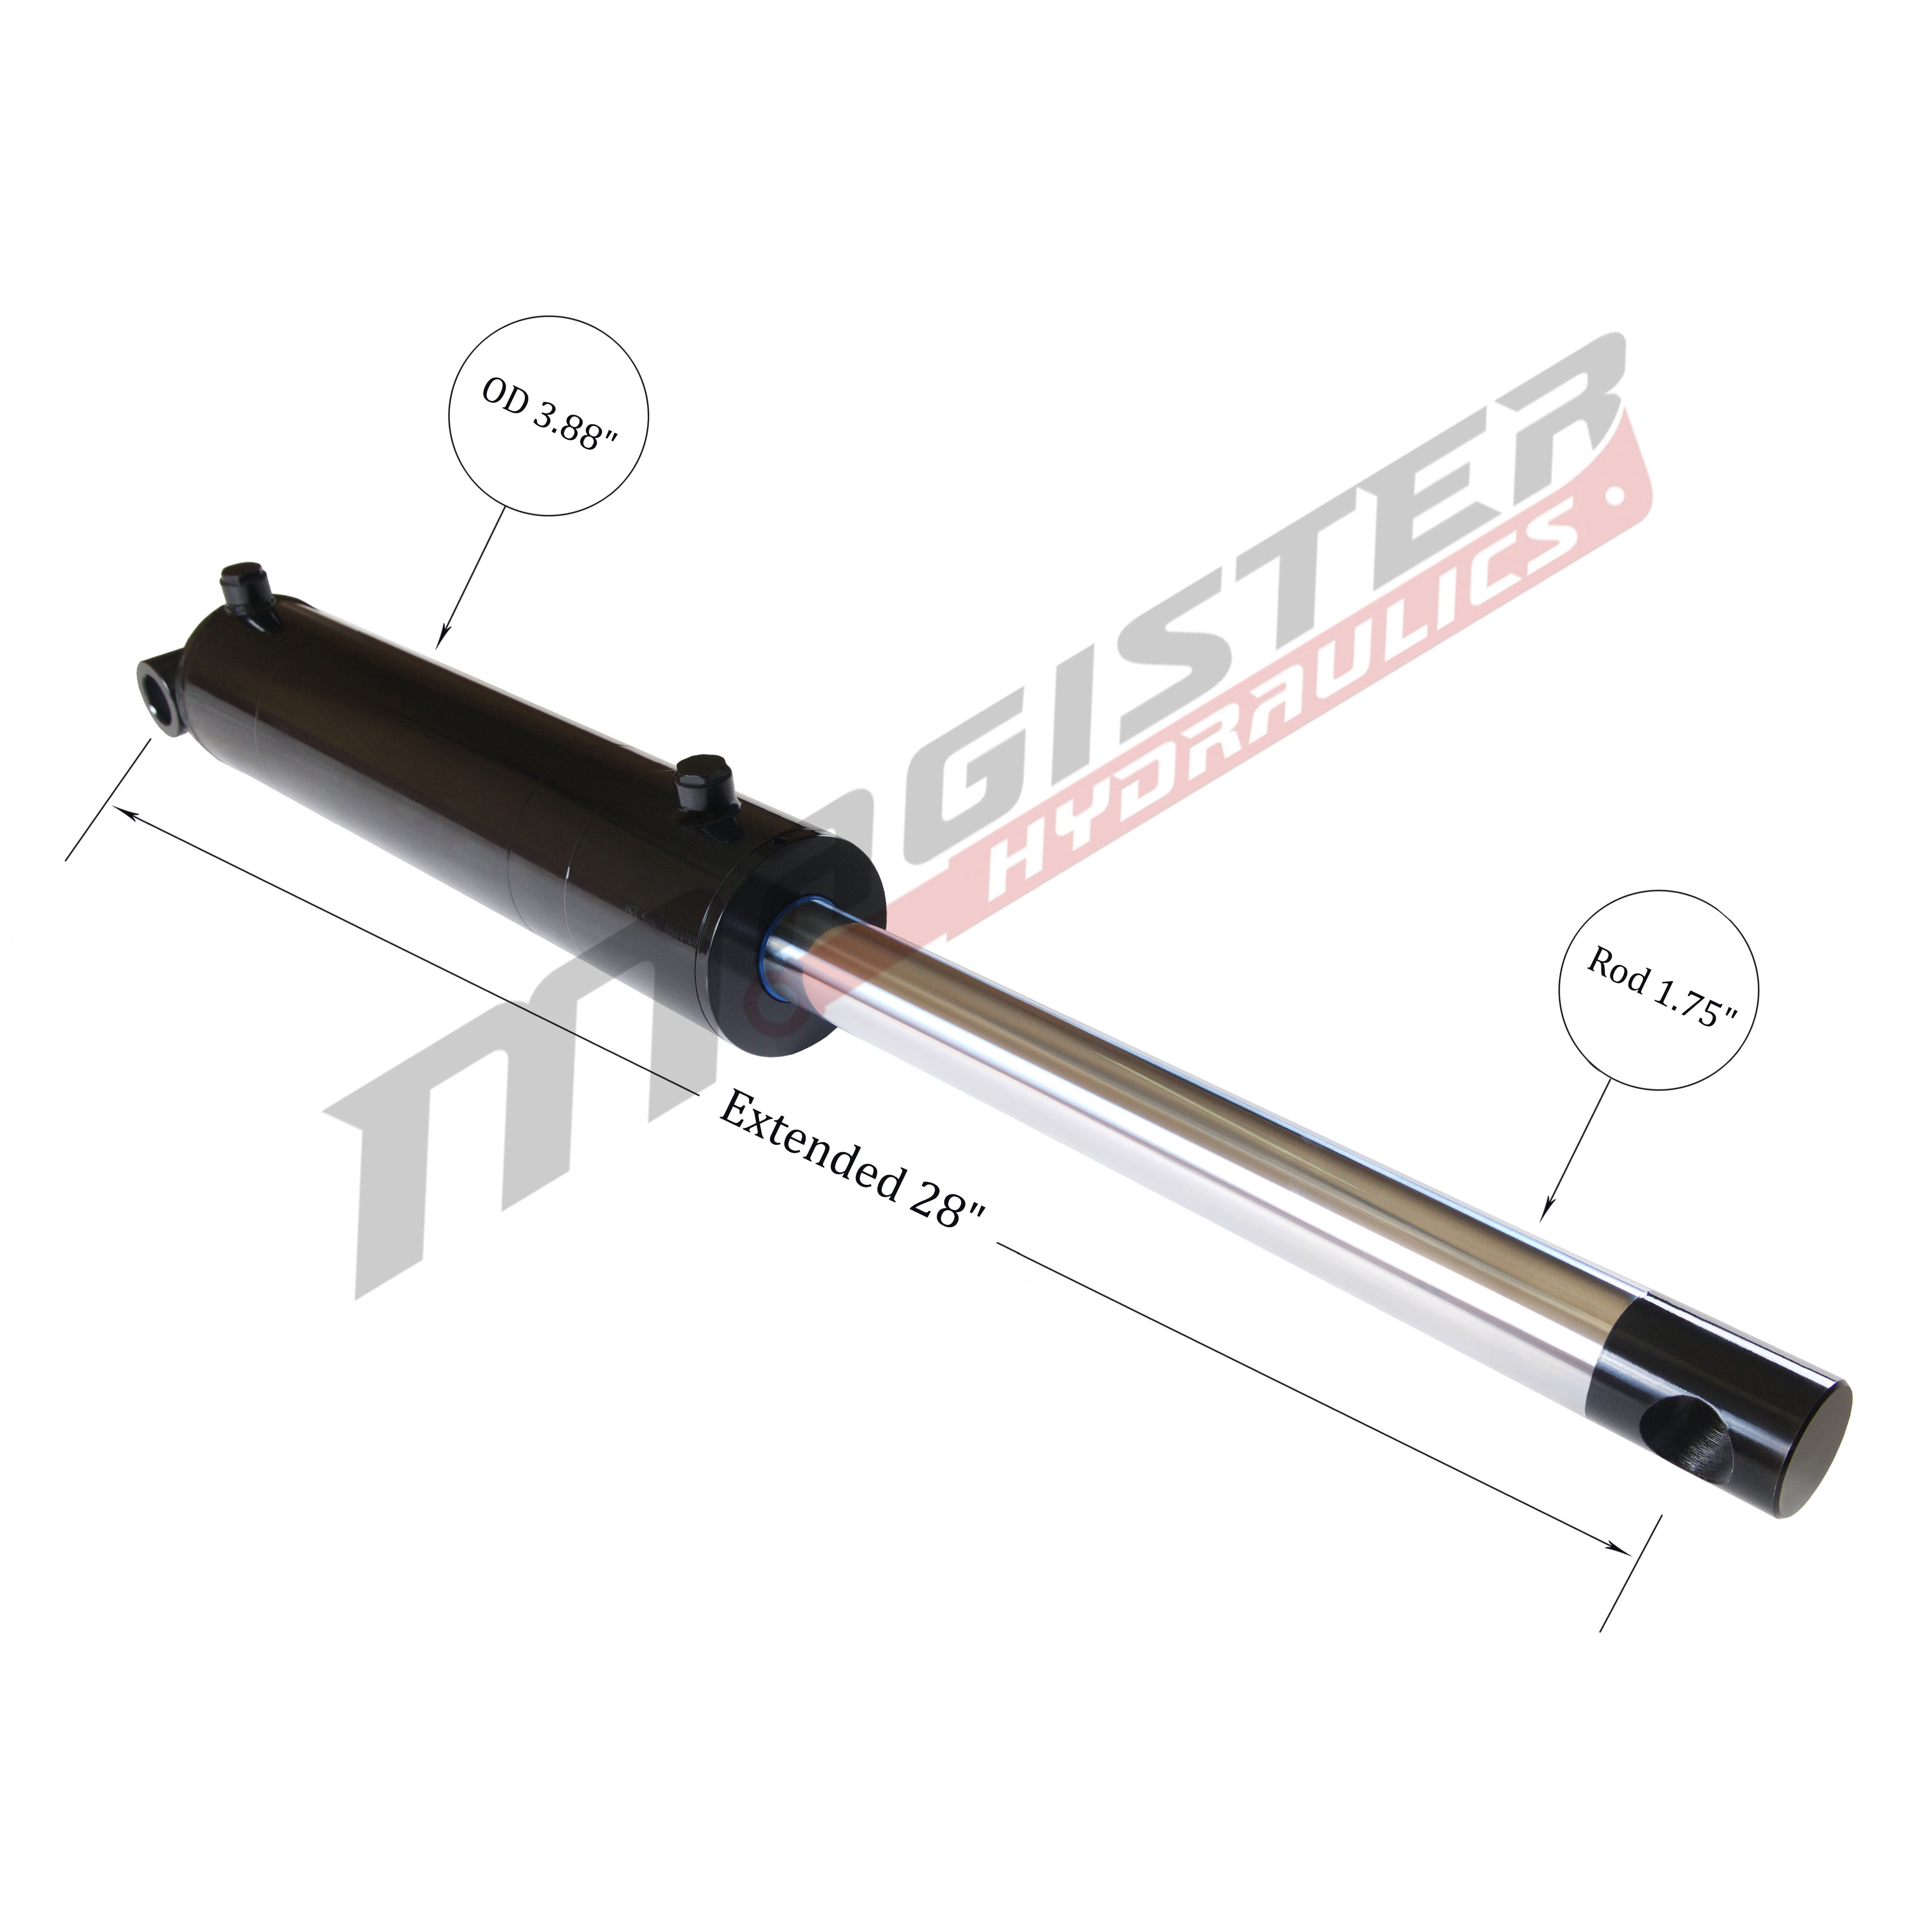 3.5 bore x 10 stroke hydraulic cylinder, welded pin eye double acting cylinder | Magister Hydraulics